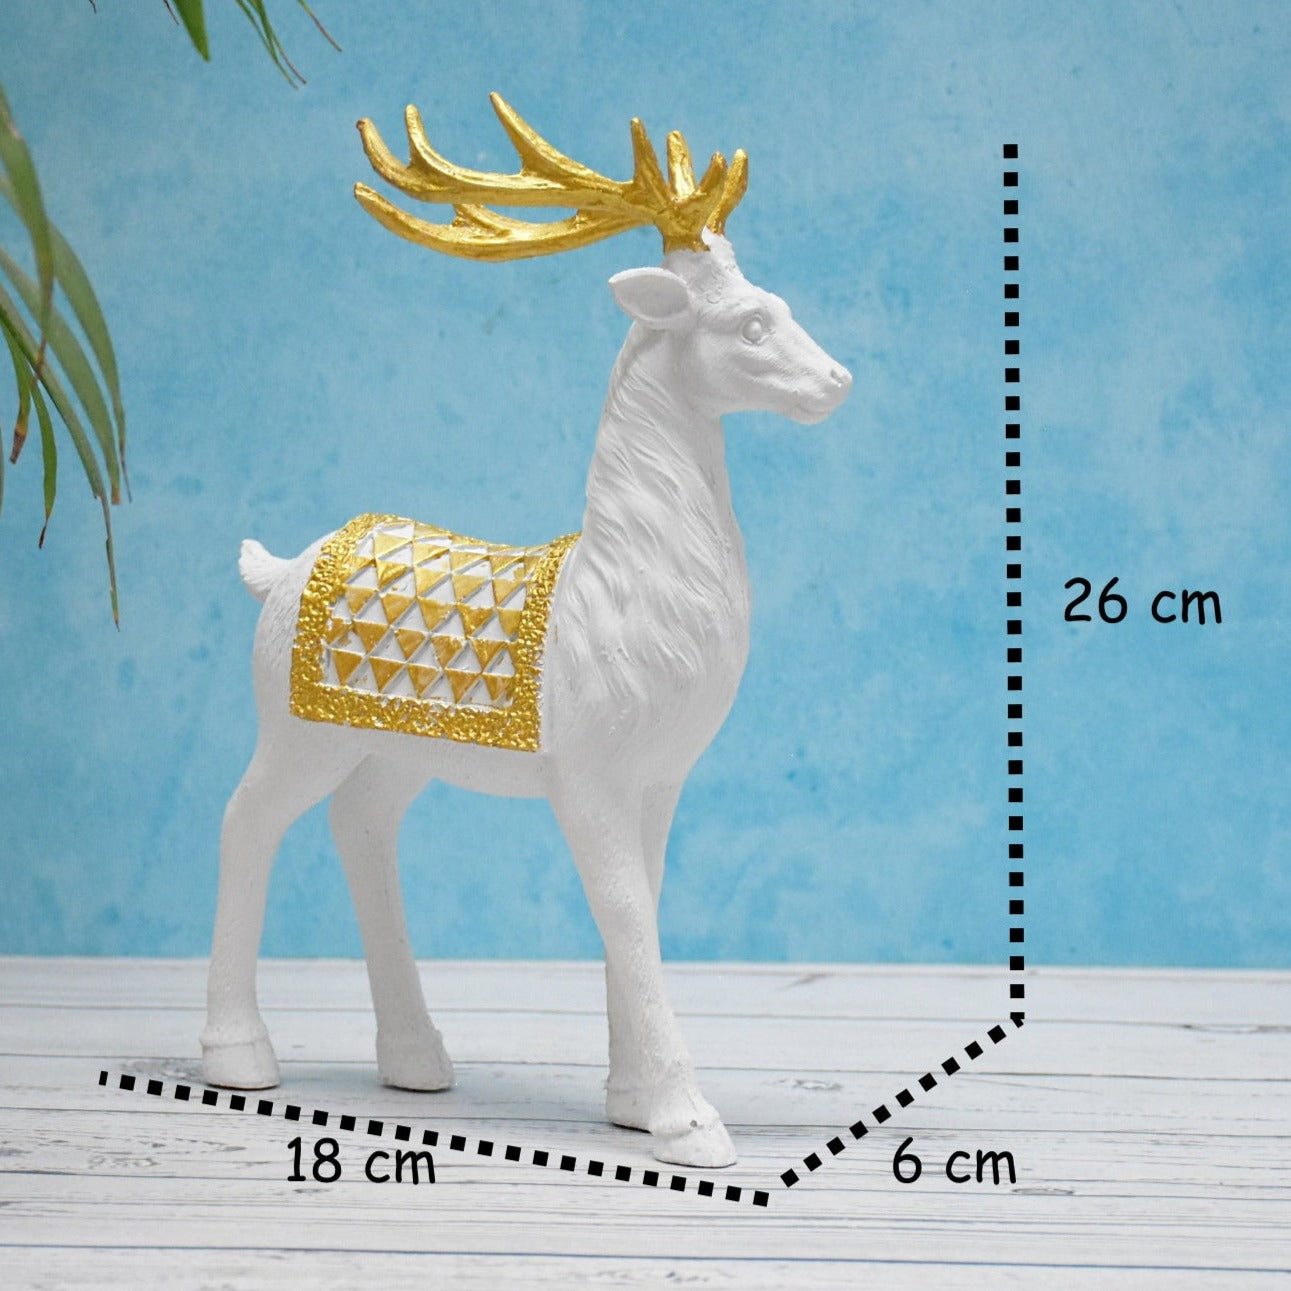 Standing Deer Showpiece For Home Decoration, Office Decor, Wedding, Gifts